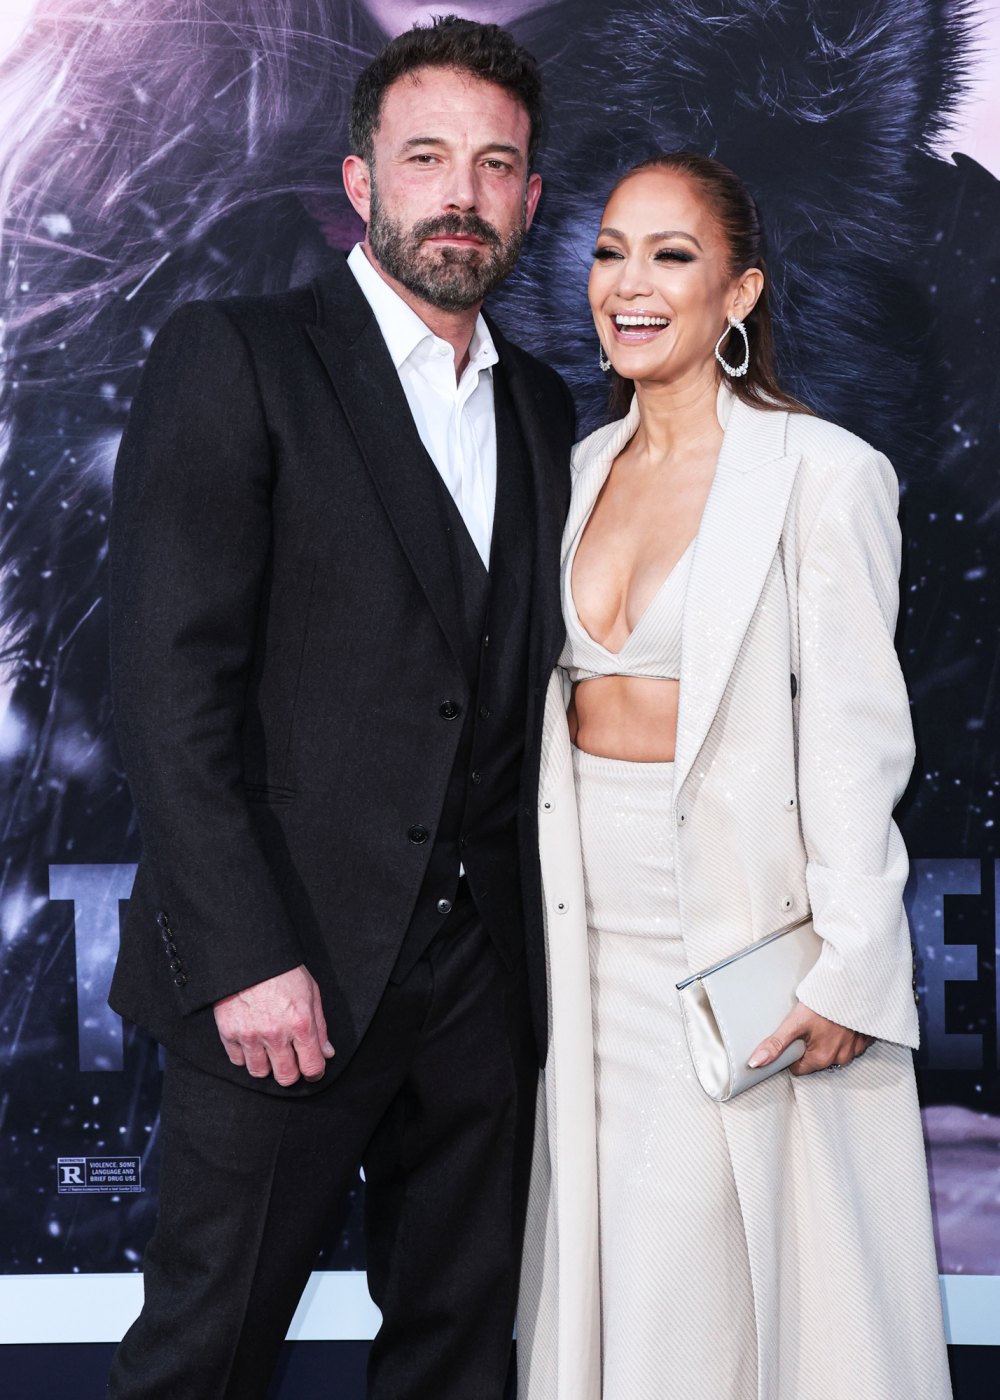 Jennifer Lopez and Husband Ben Affleck Brought Their Moms as Dates to The Mother Screening